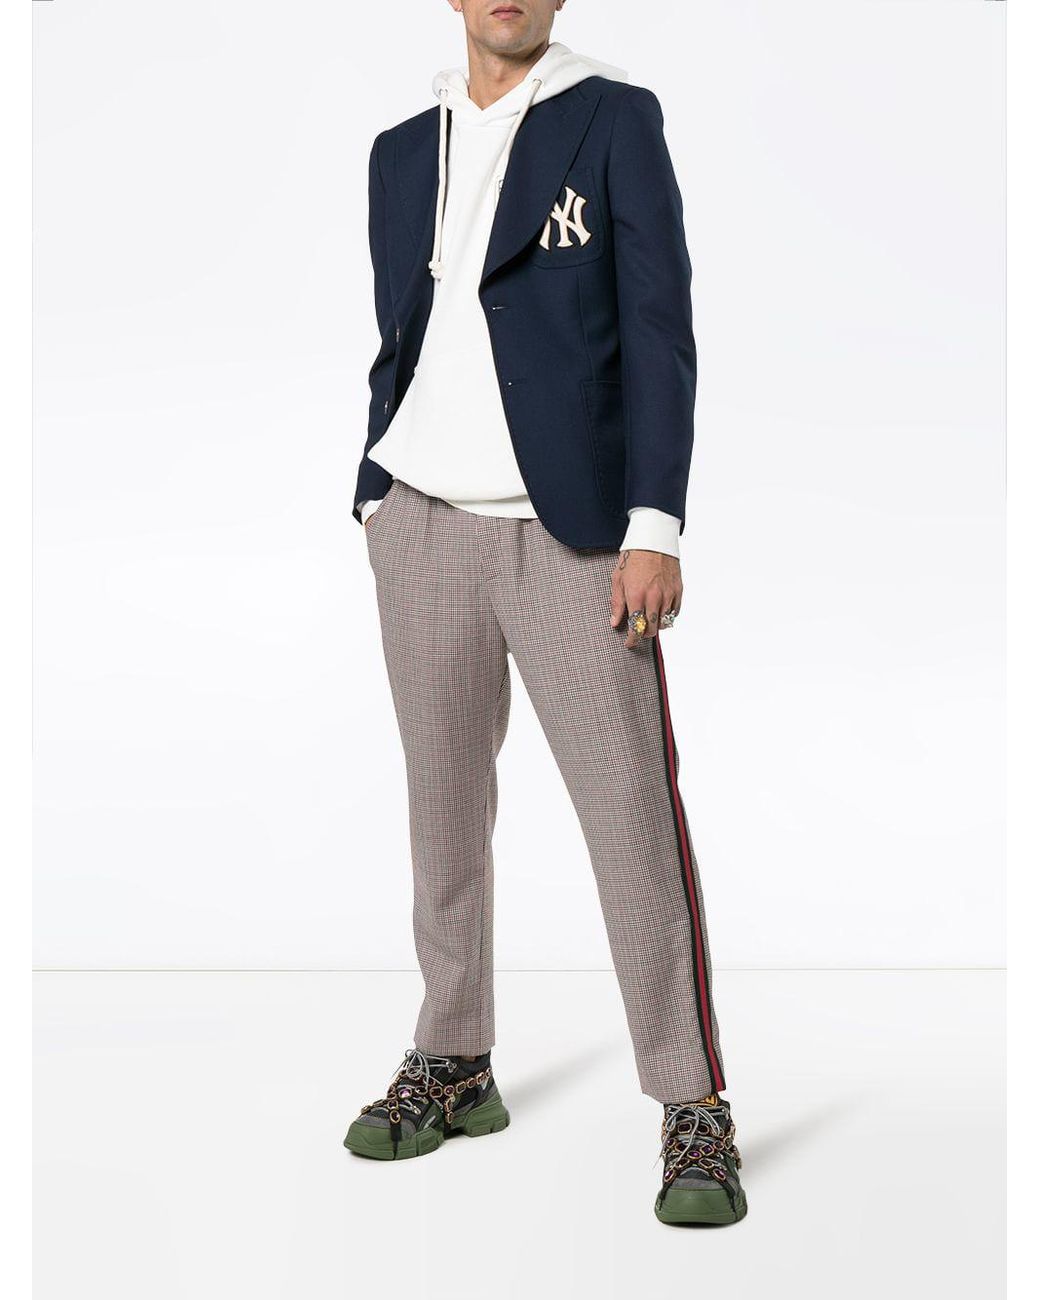 Gucci X Mlb Ny Yankees Patch Sneakers in Brown for Men  Lyst